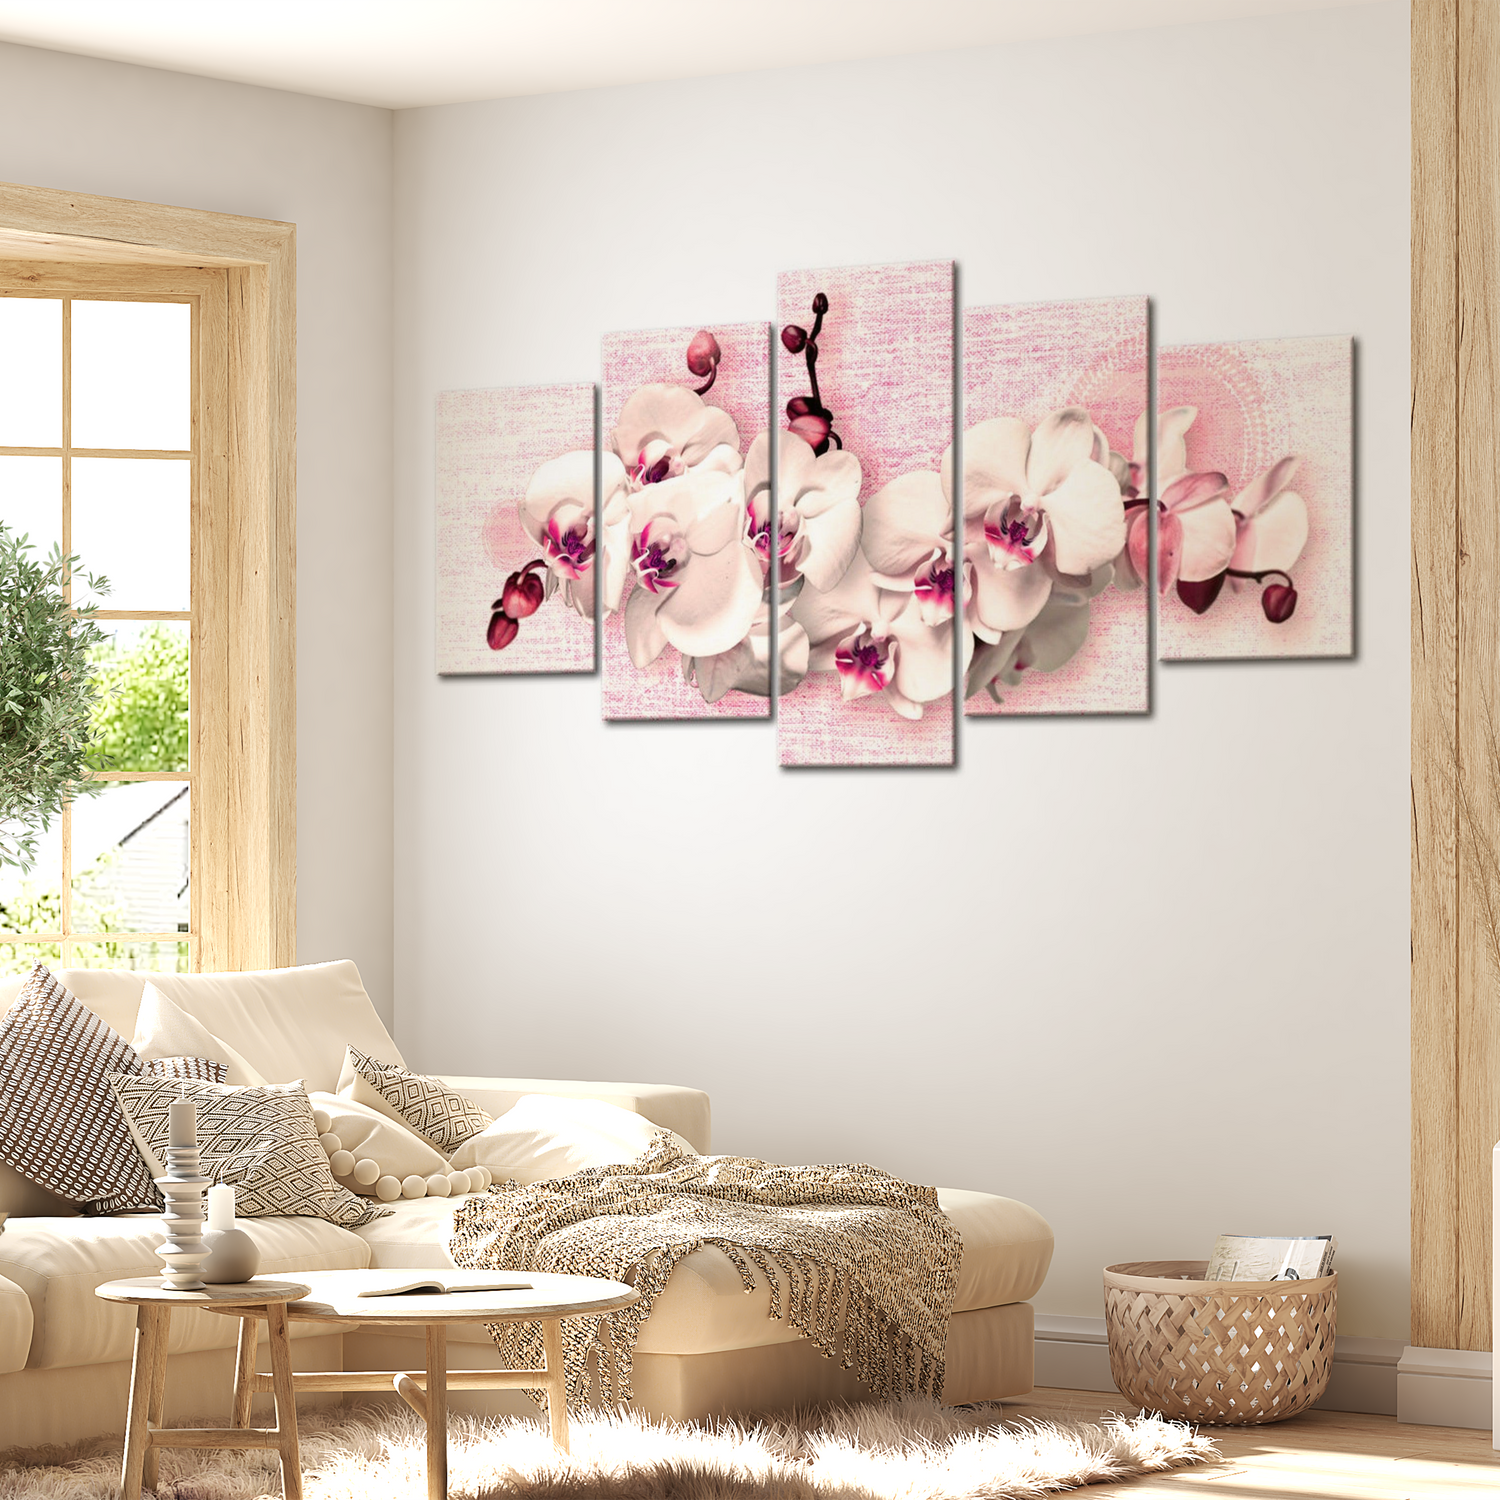 Stretched Canvas Floral Art - Metaphor Of Feminity - 5 Pieces 40"Wx20"H